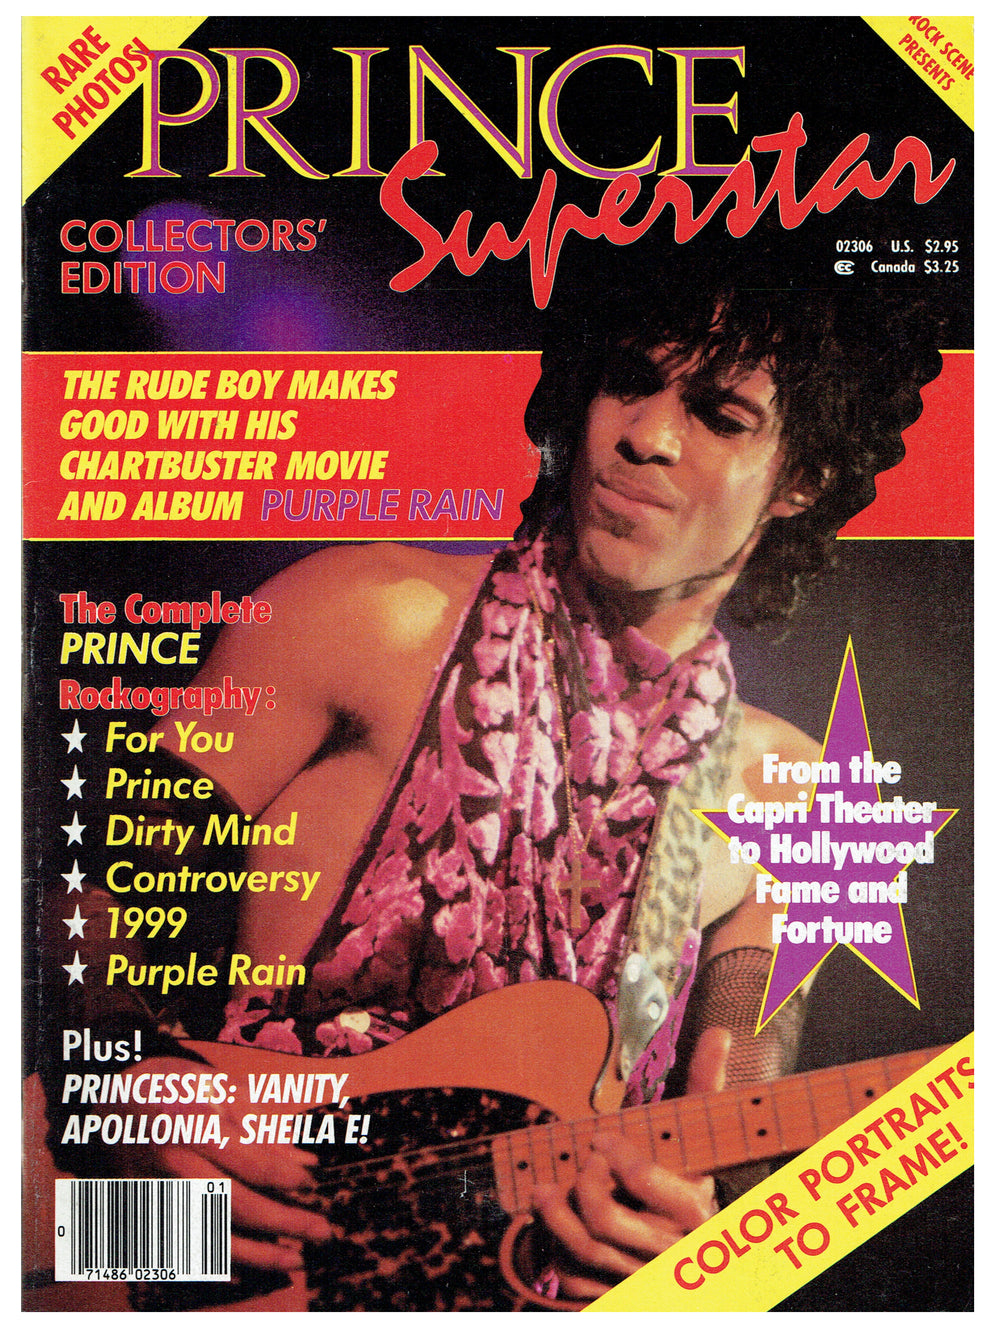 Prince Special Superstar Collectors Magazine 76 Pages Printed In USA 1984 Near Mint